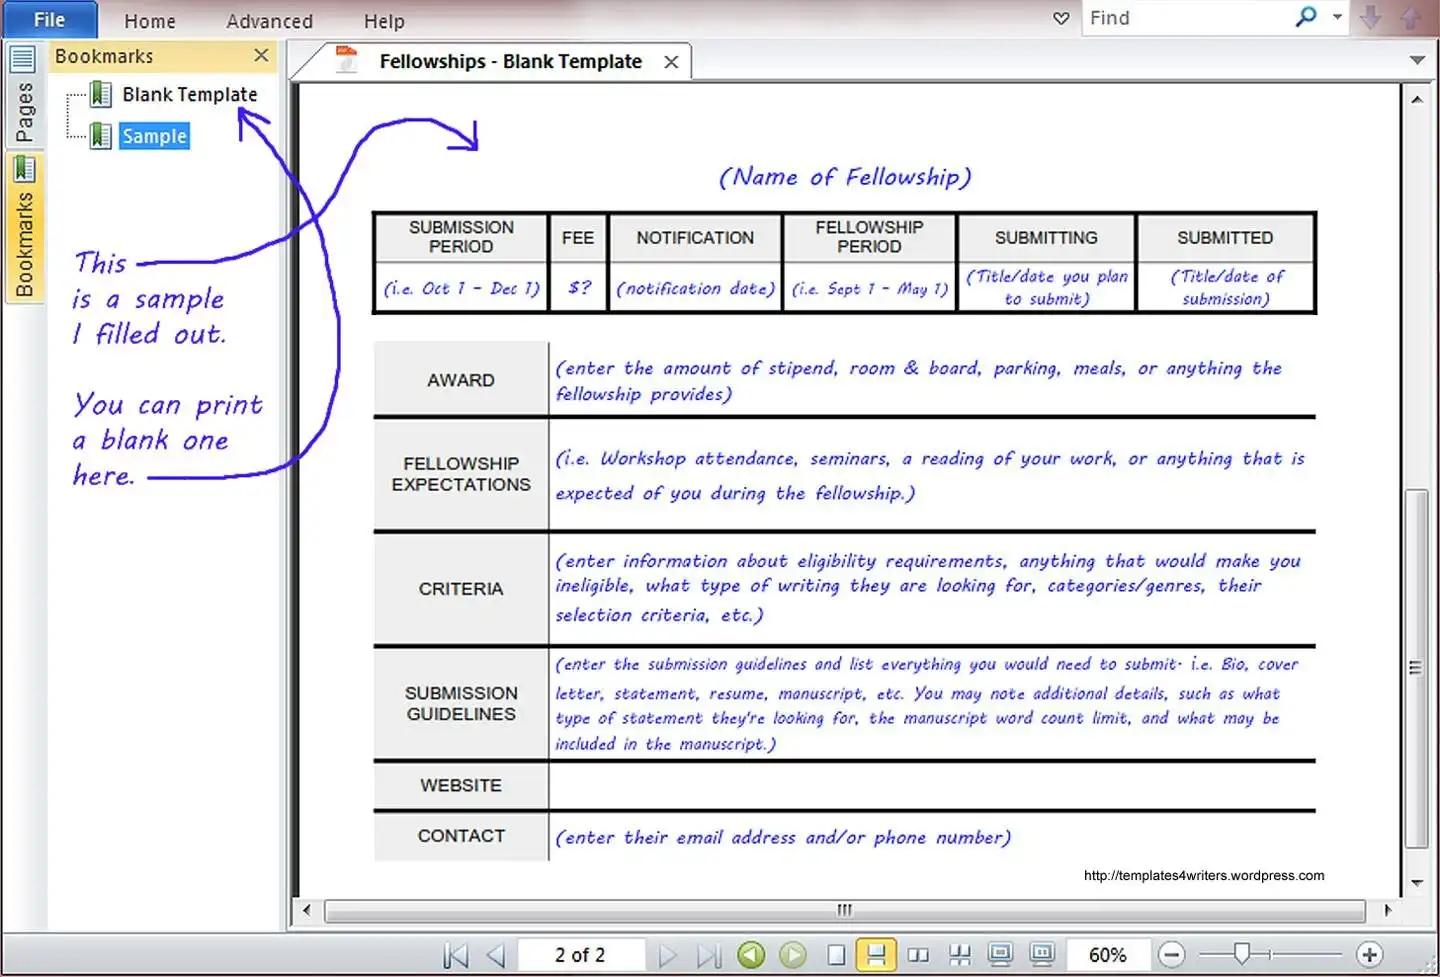 Download web tool or web app Template for Writing Fellowships